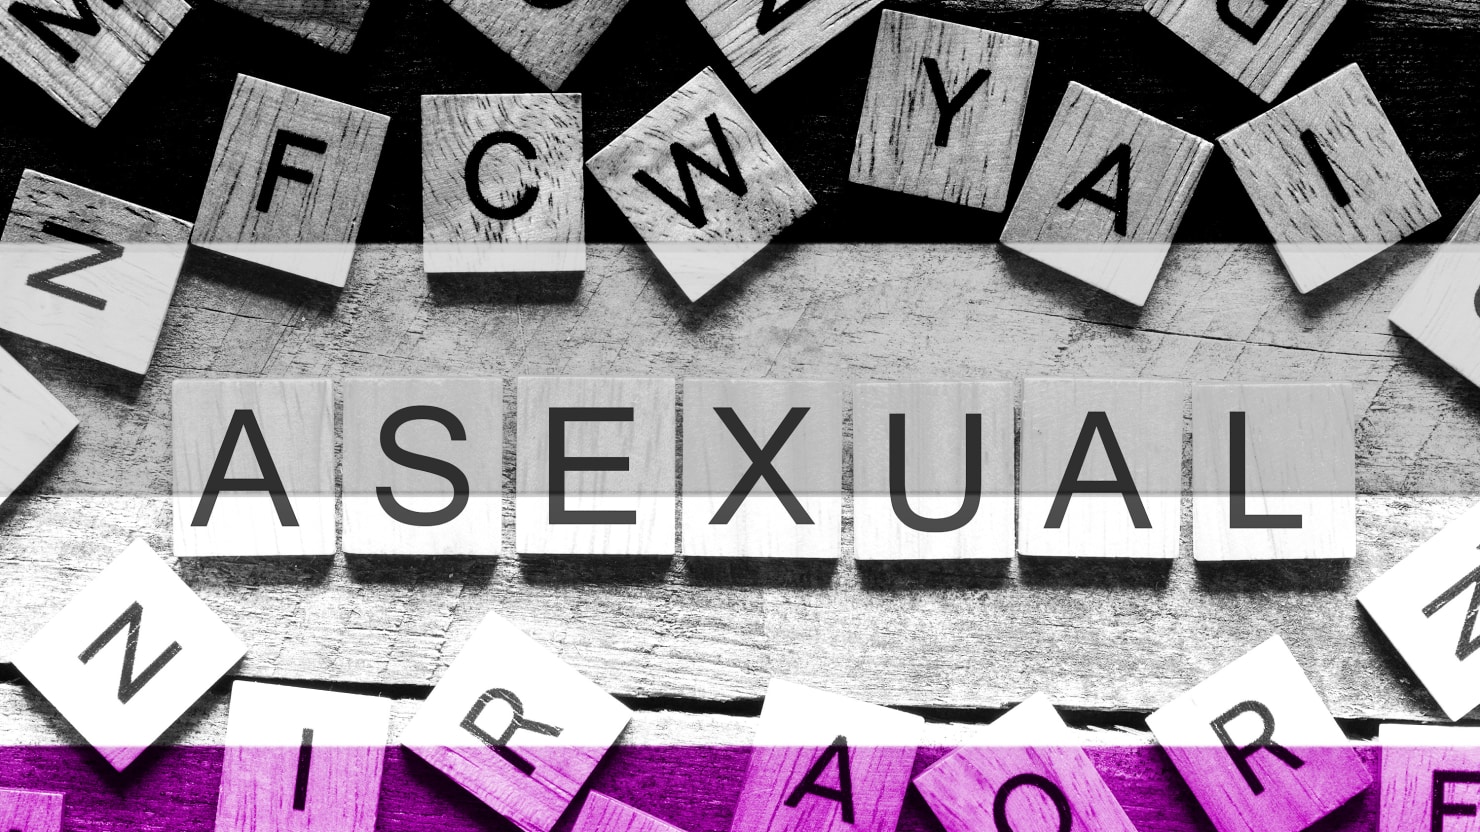 There’s nothing wrong with being asexual